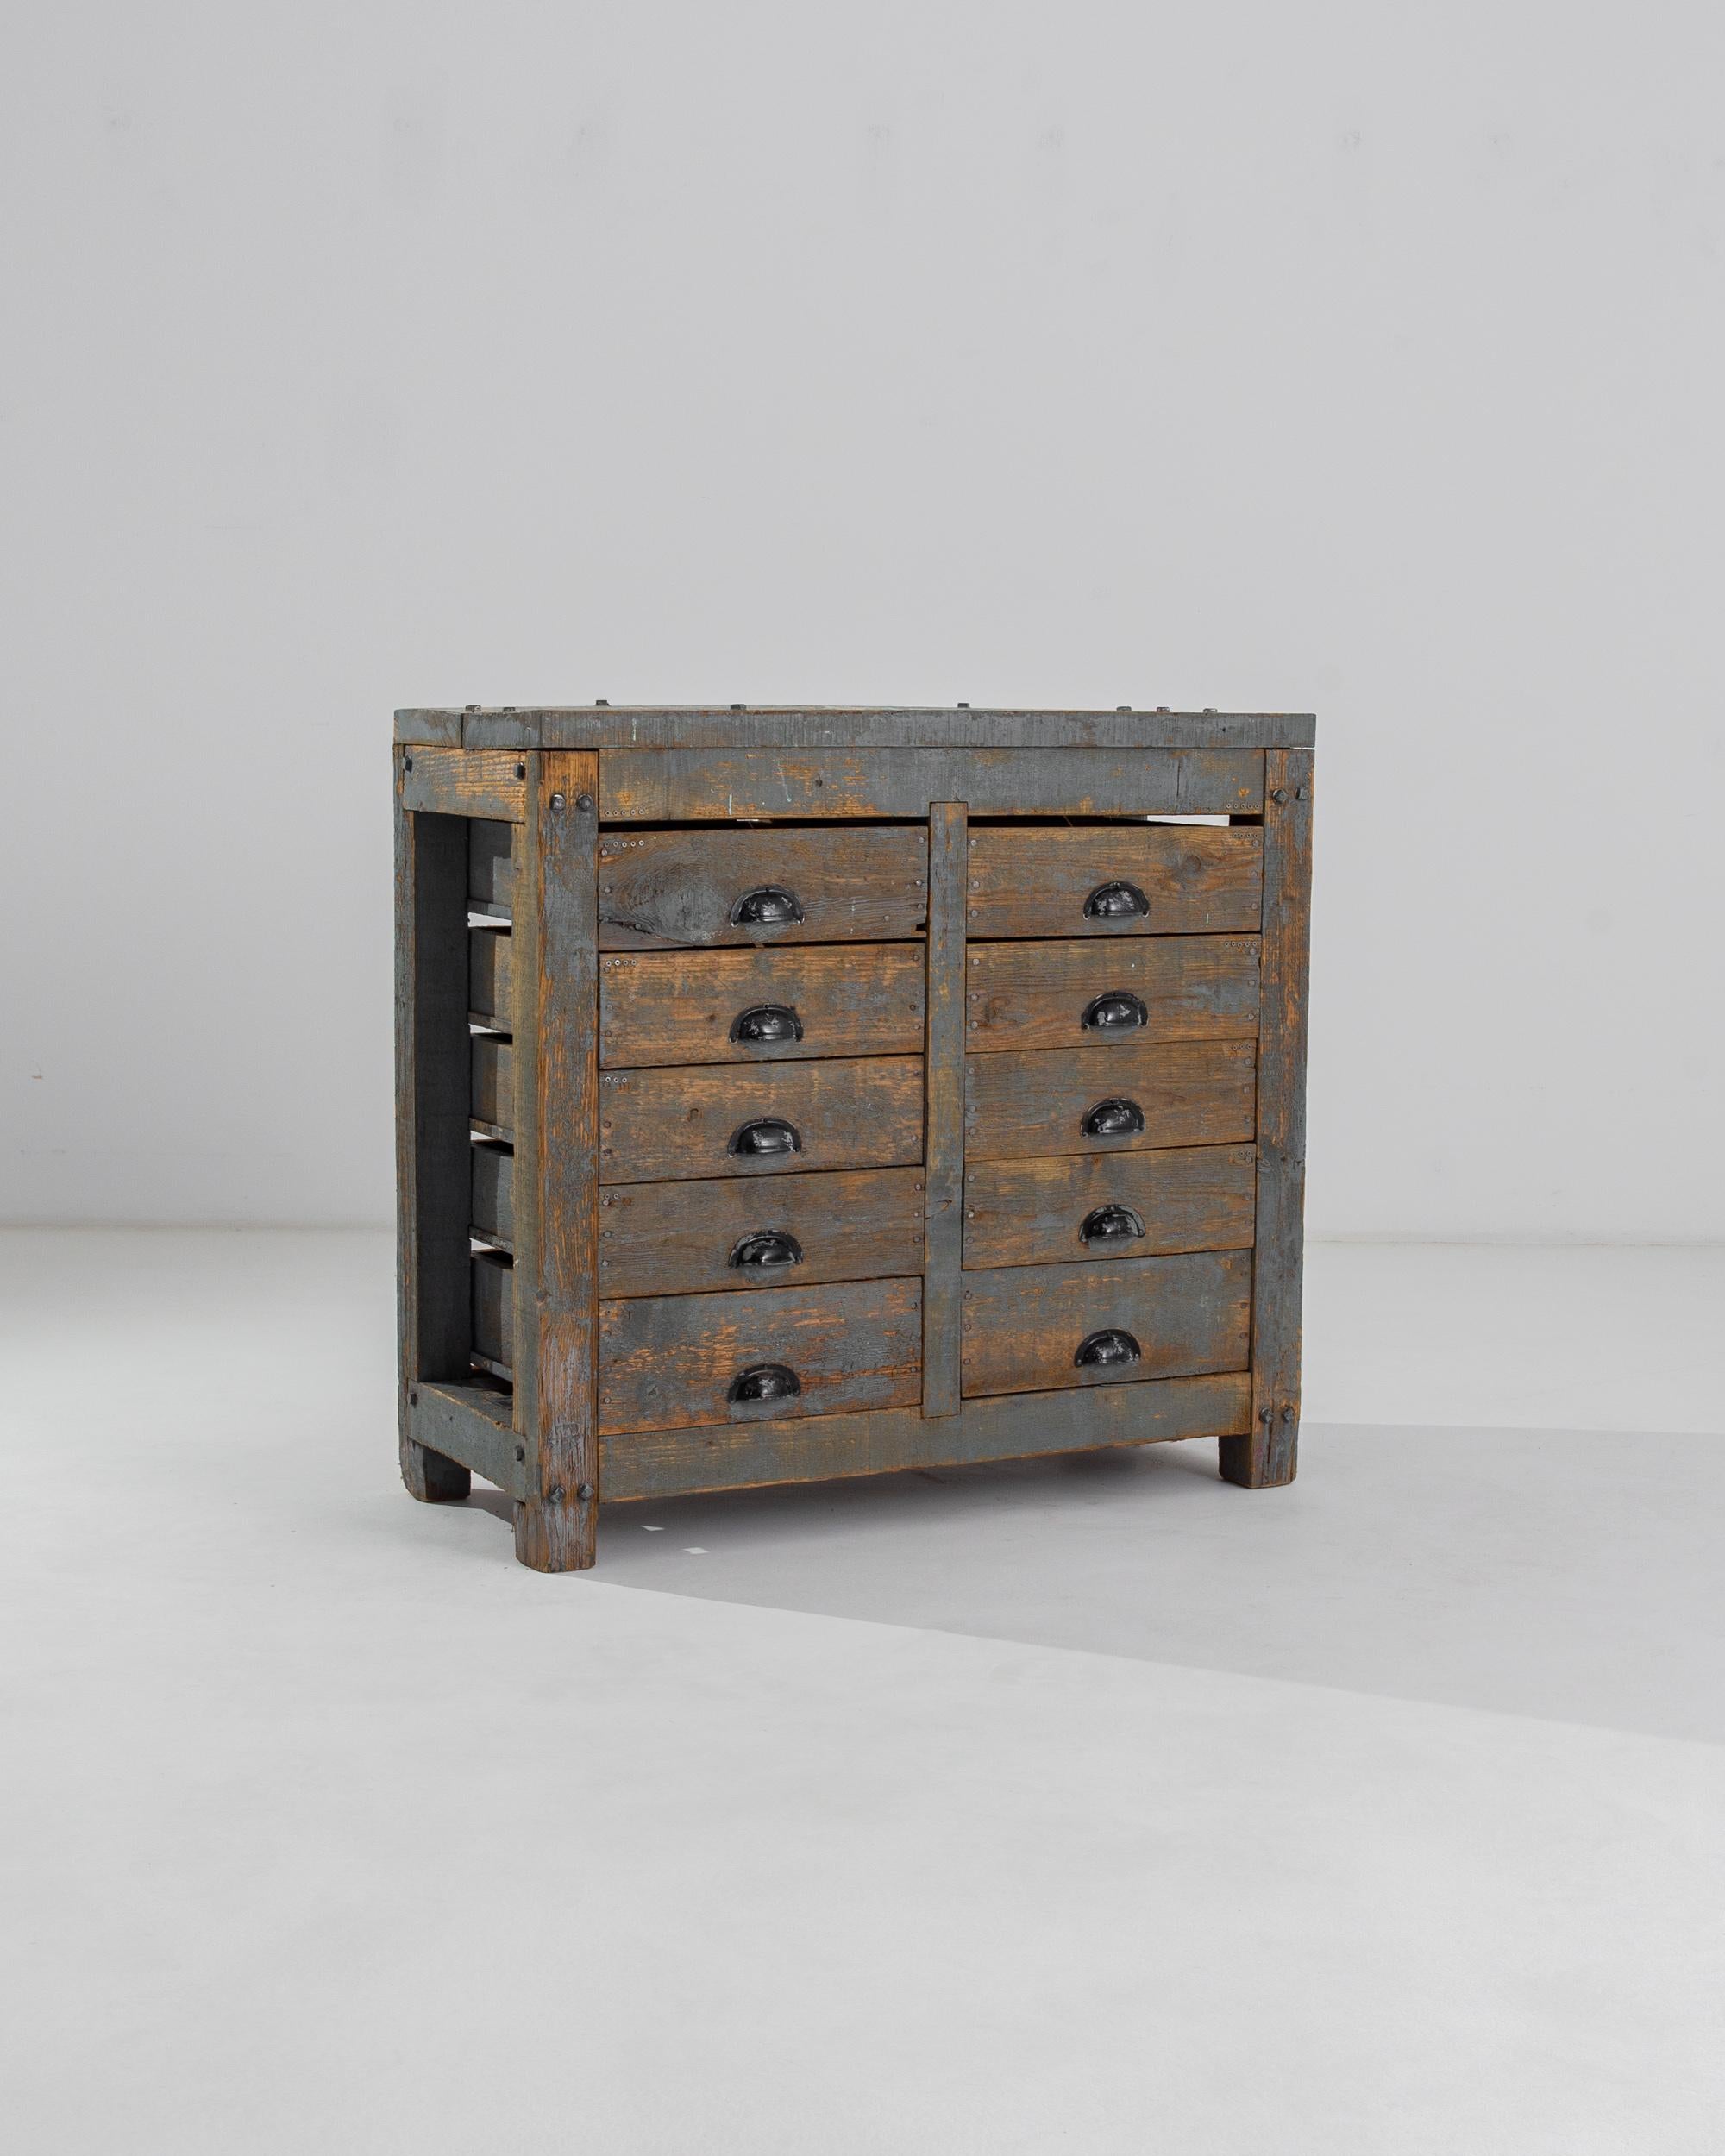 This industrial work table holds a chest of drawers with a unique, timeworn patina. Made in France in the 20th century, a series of ten drawers are arranged in two columns within a sturdy wooden frame. The cabinet has no back or sides, and the